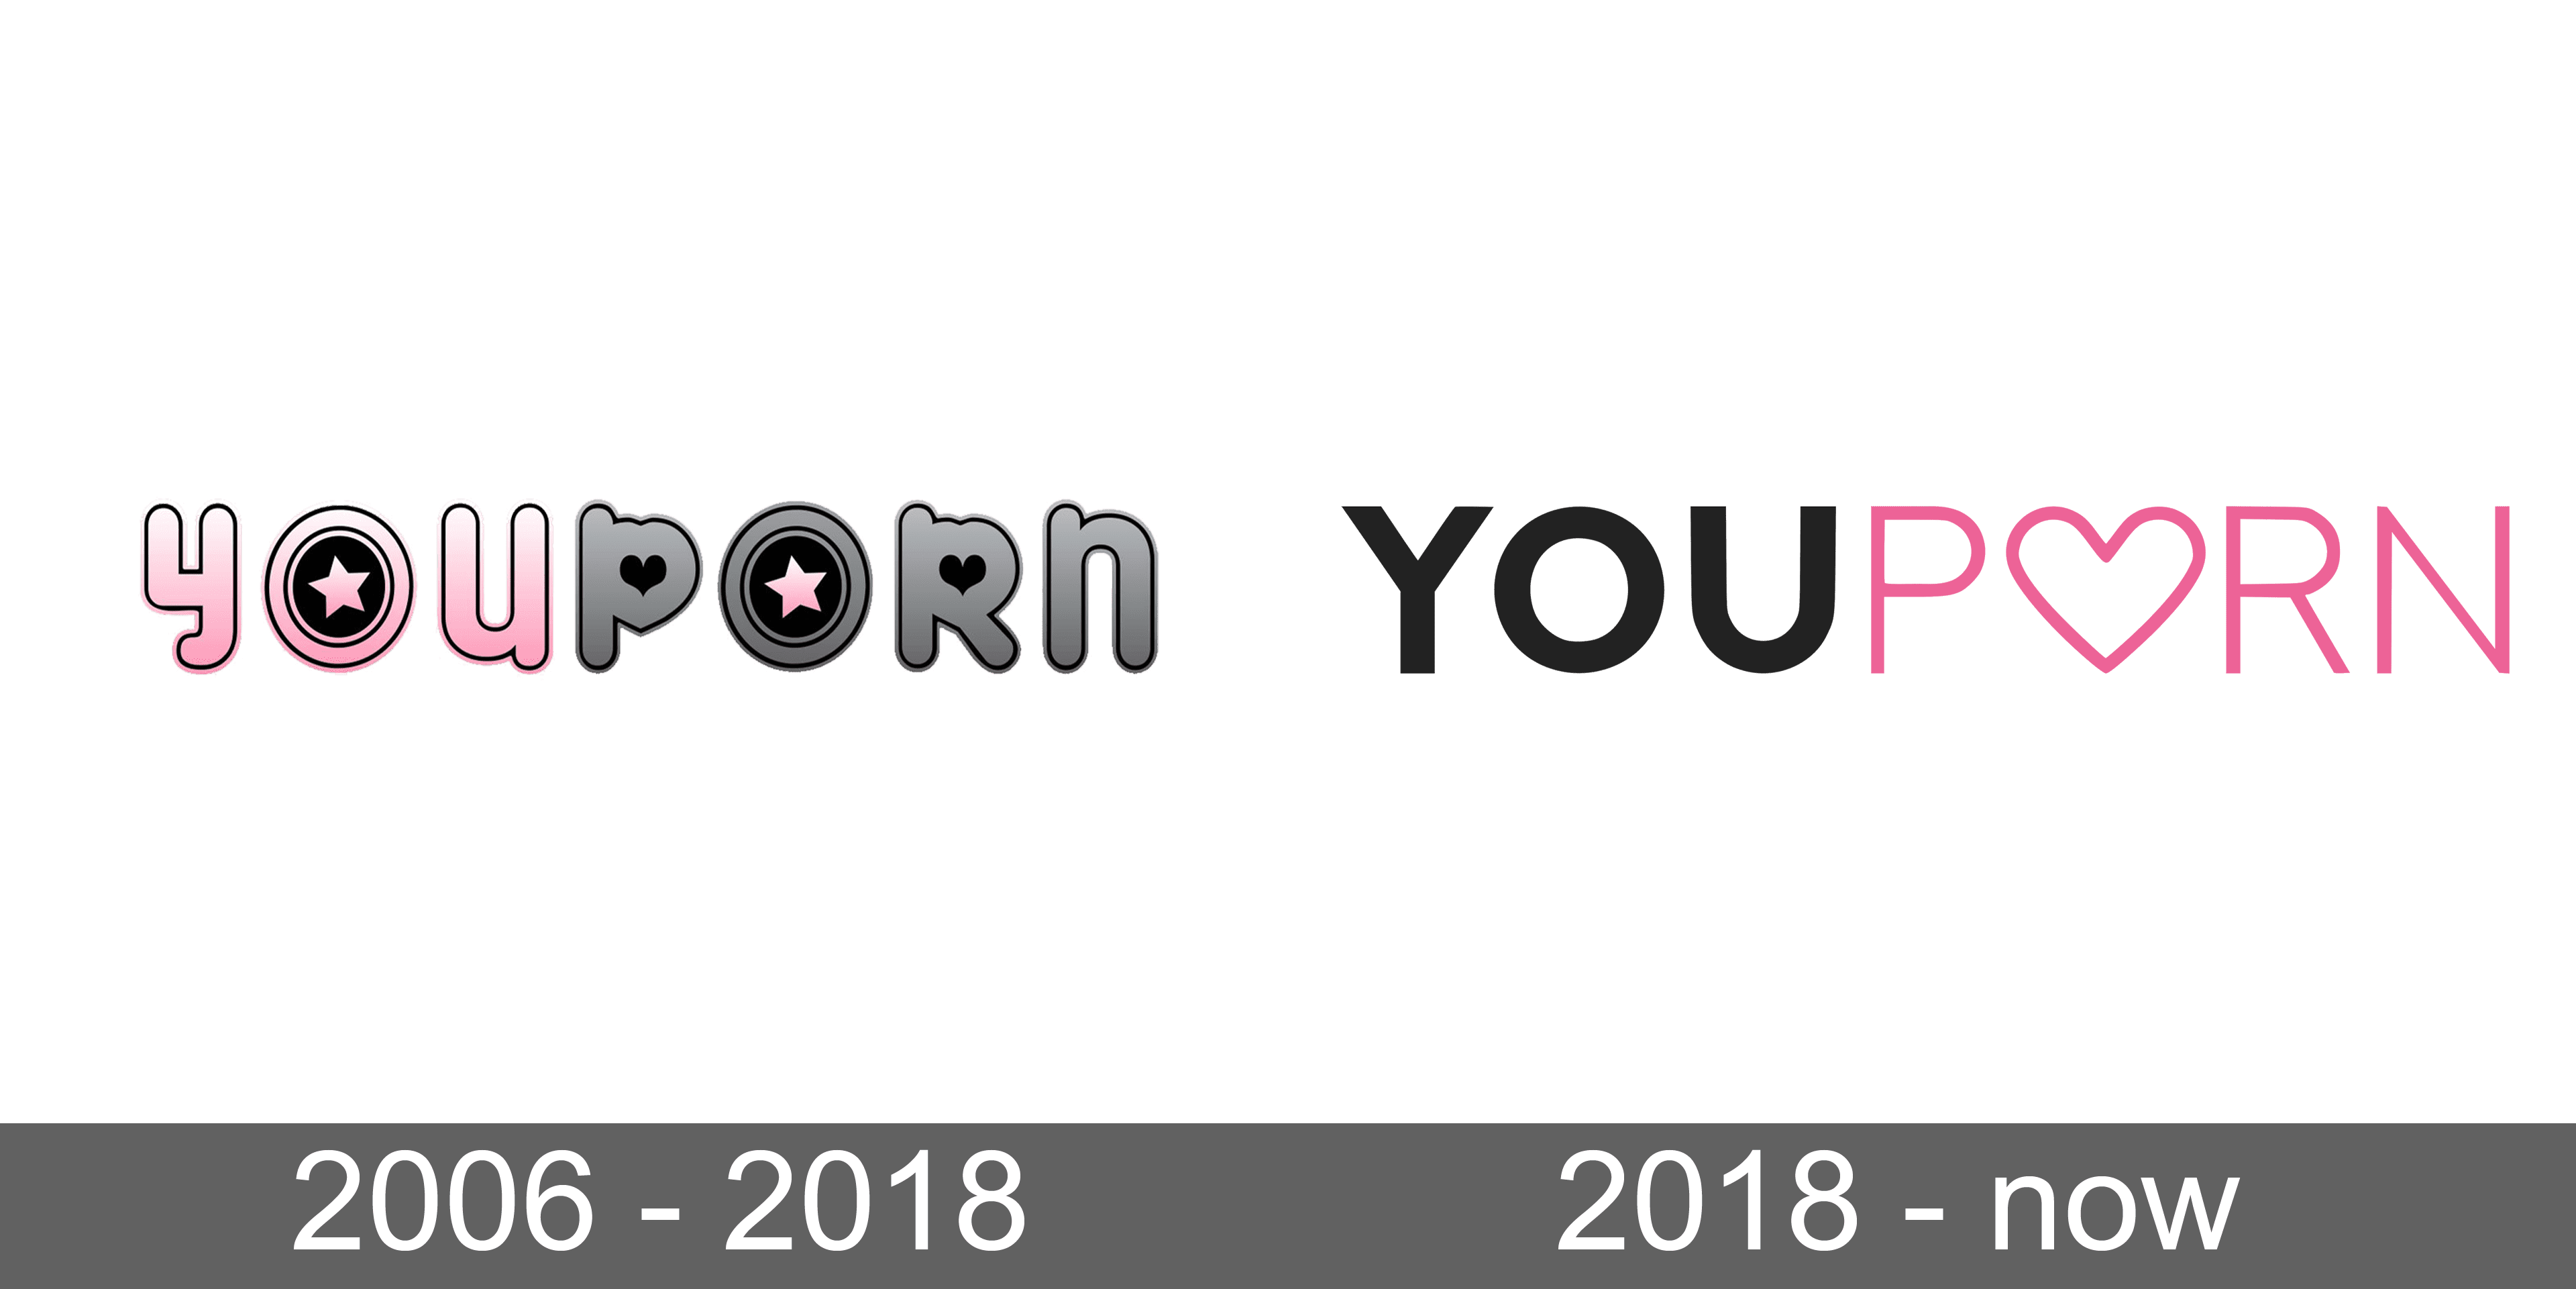 Yoprn - YouPorn Logo and symbol, meaning, history, sign.